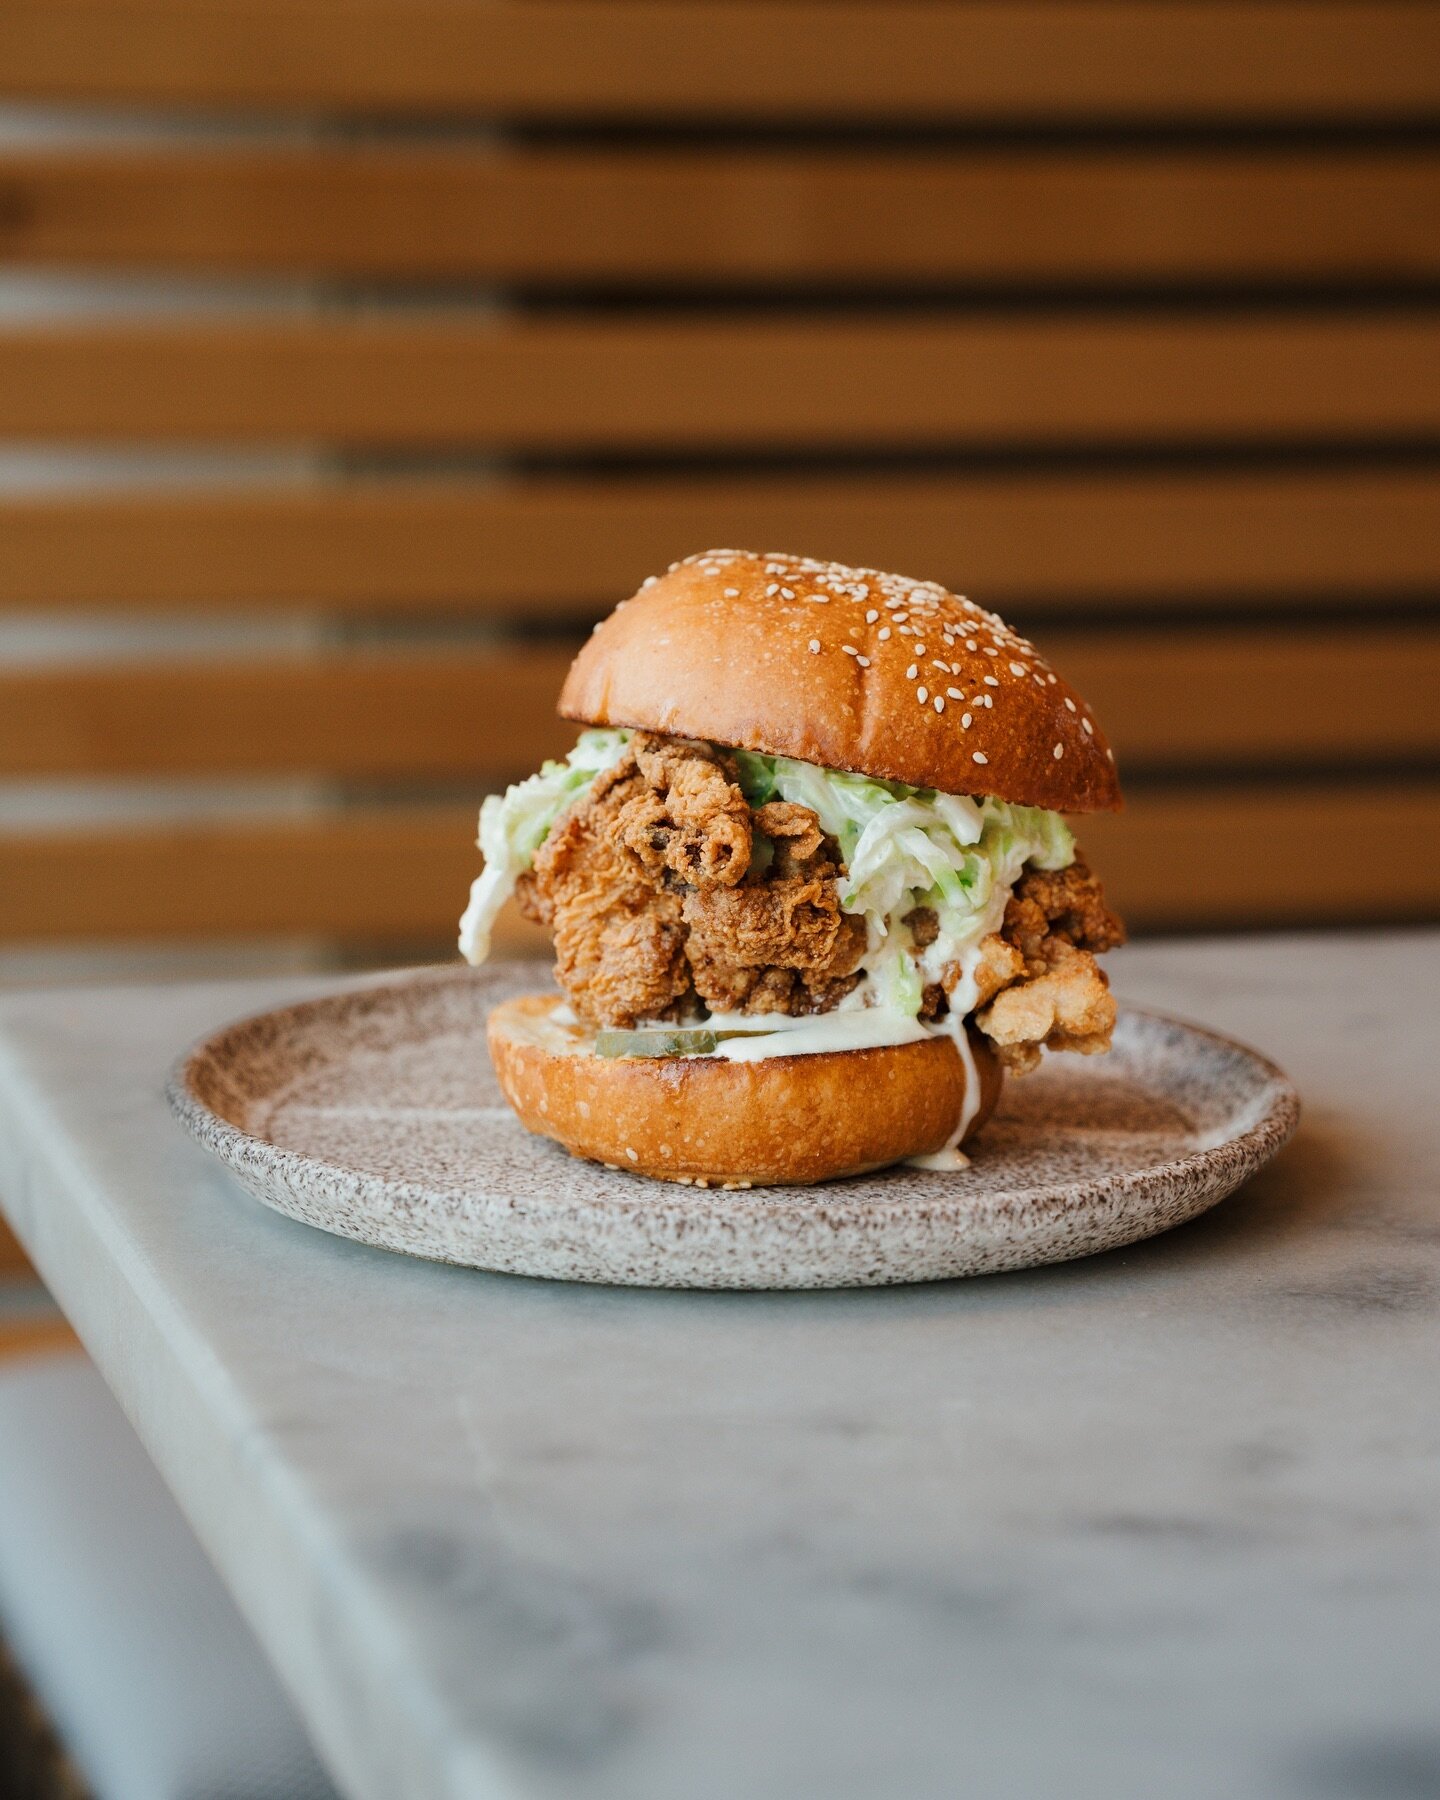 We&rsquo;ve got your dinner plans covered&hellip; Thursday nights around here are for ramen, big drinks, and dishes like this buttermilk koji fried chicken sandwich with spicy sesame slaw and pickles &mdash; stop on by and see what we&rsquo;ve got co